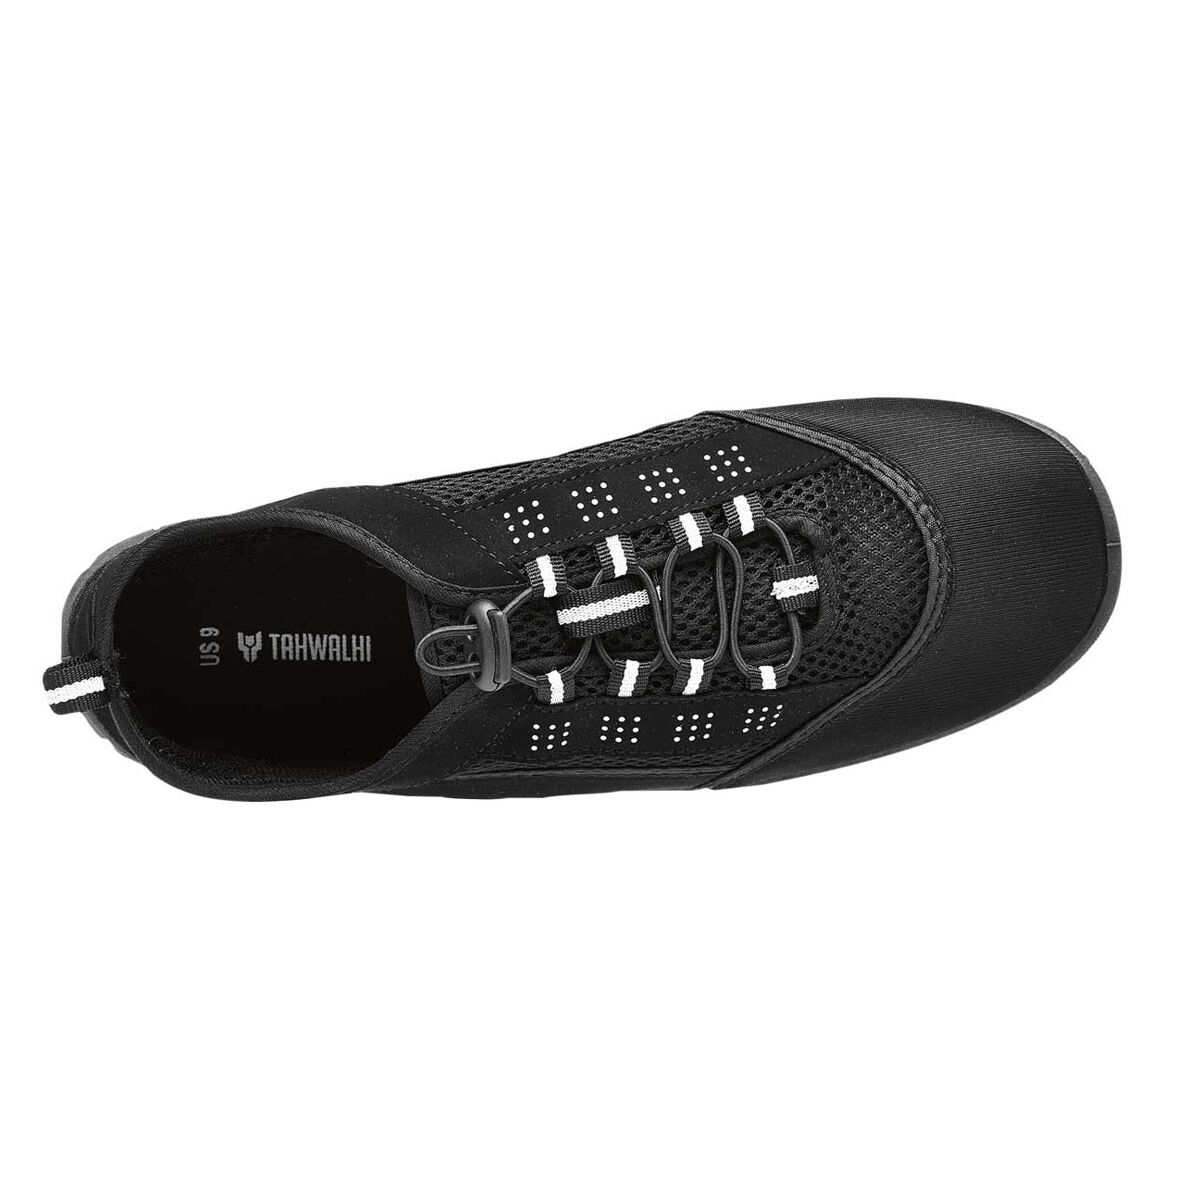 swimming shoes mr price sport